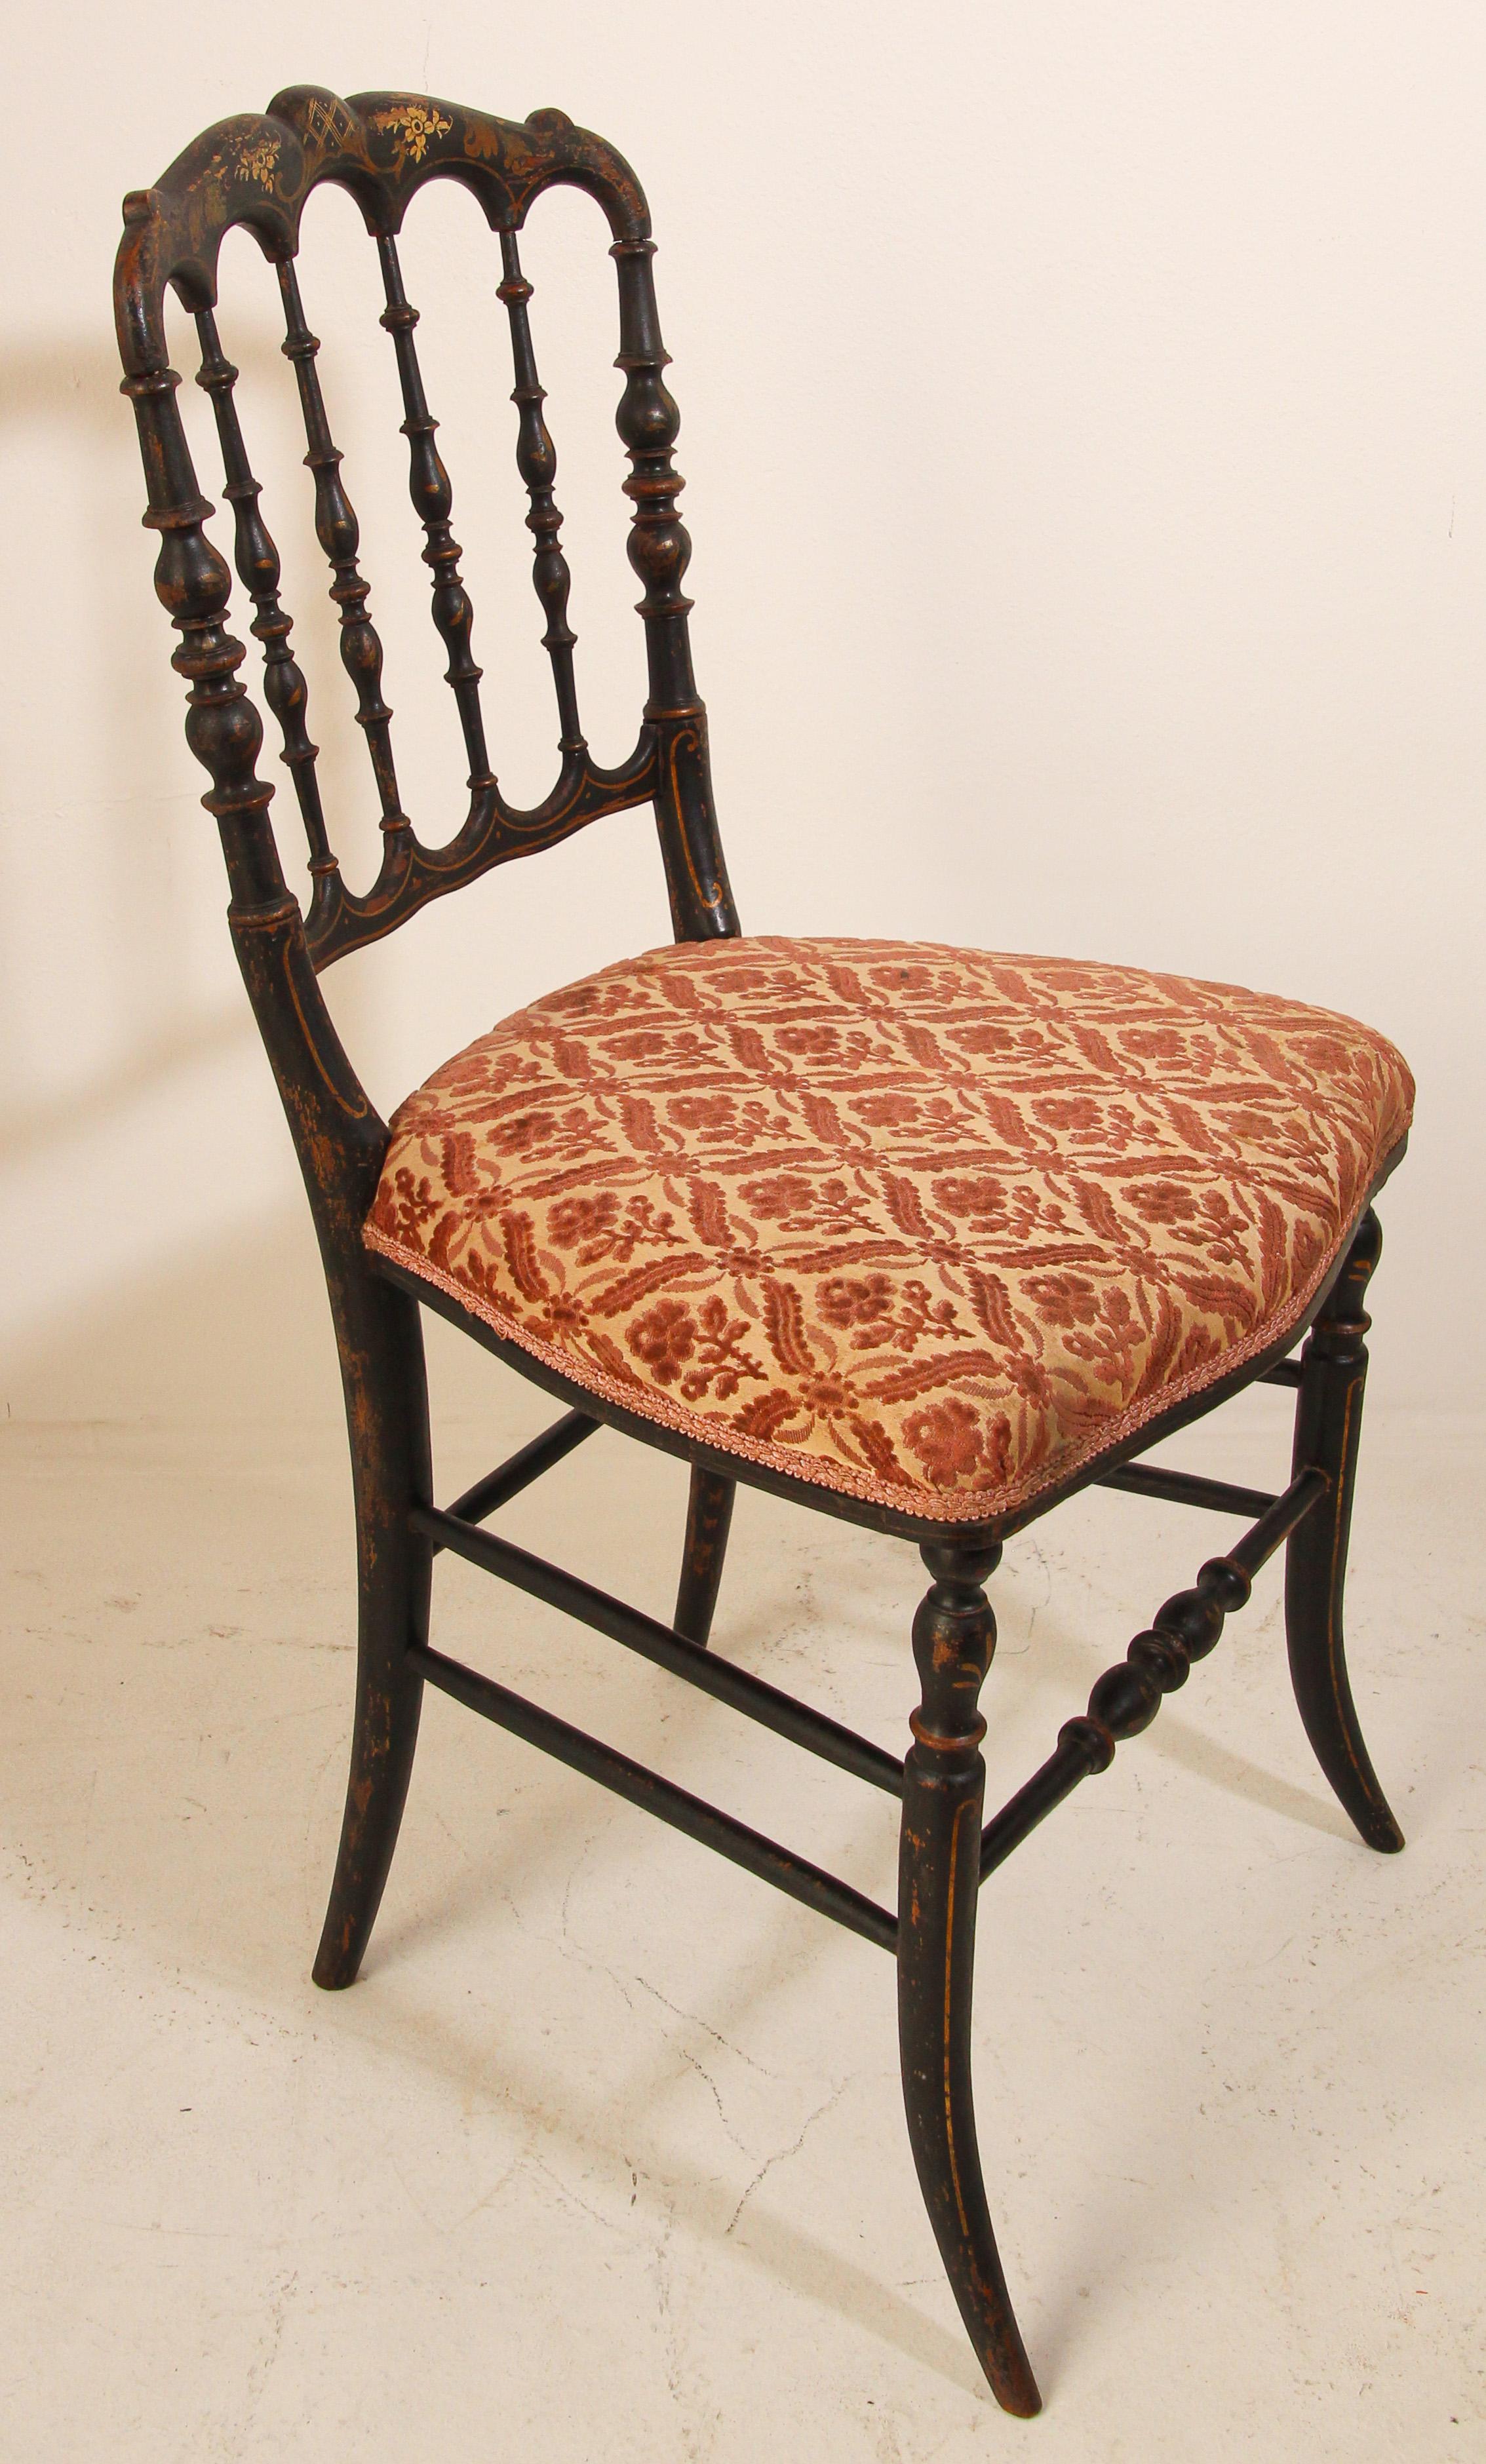 Chiavari ebonized chair by Gaetano Descalzi. 
19th century chair covered with textured cut velvet fabric, lovely color and condition.
Italian Chiavari Italy, 1850s entry chair or vanity chair with wear and lack of gilding.
The Chiavari chairs was